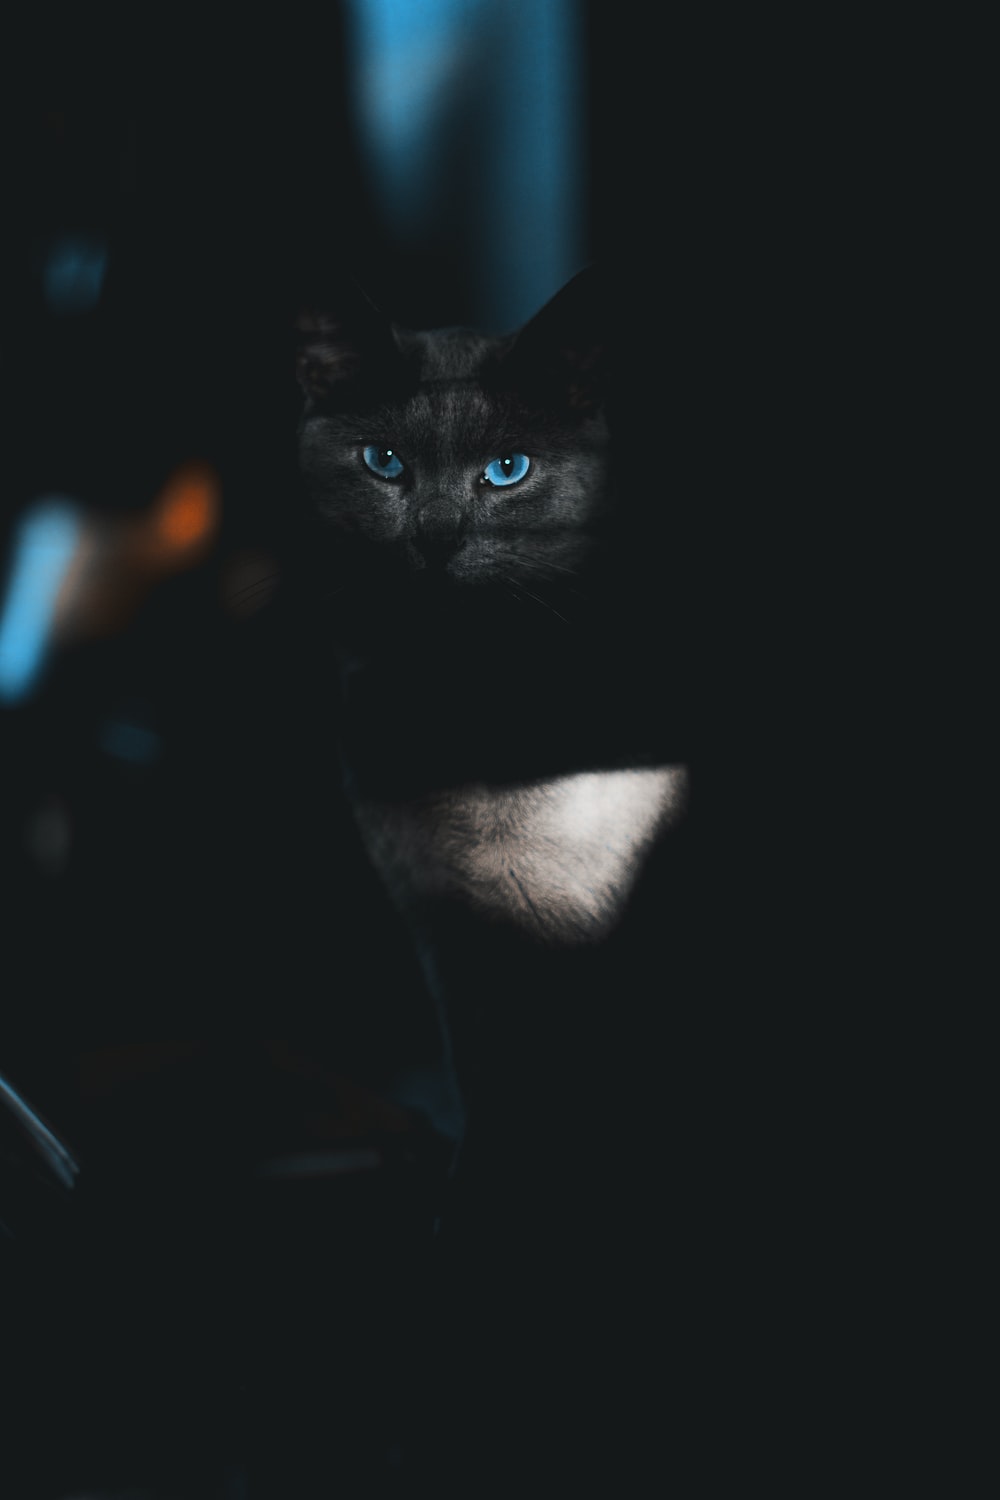 Black Cats Picture. Download Free Image